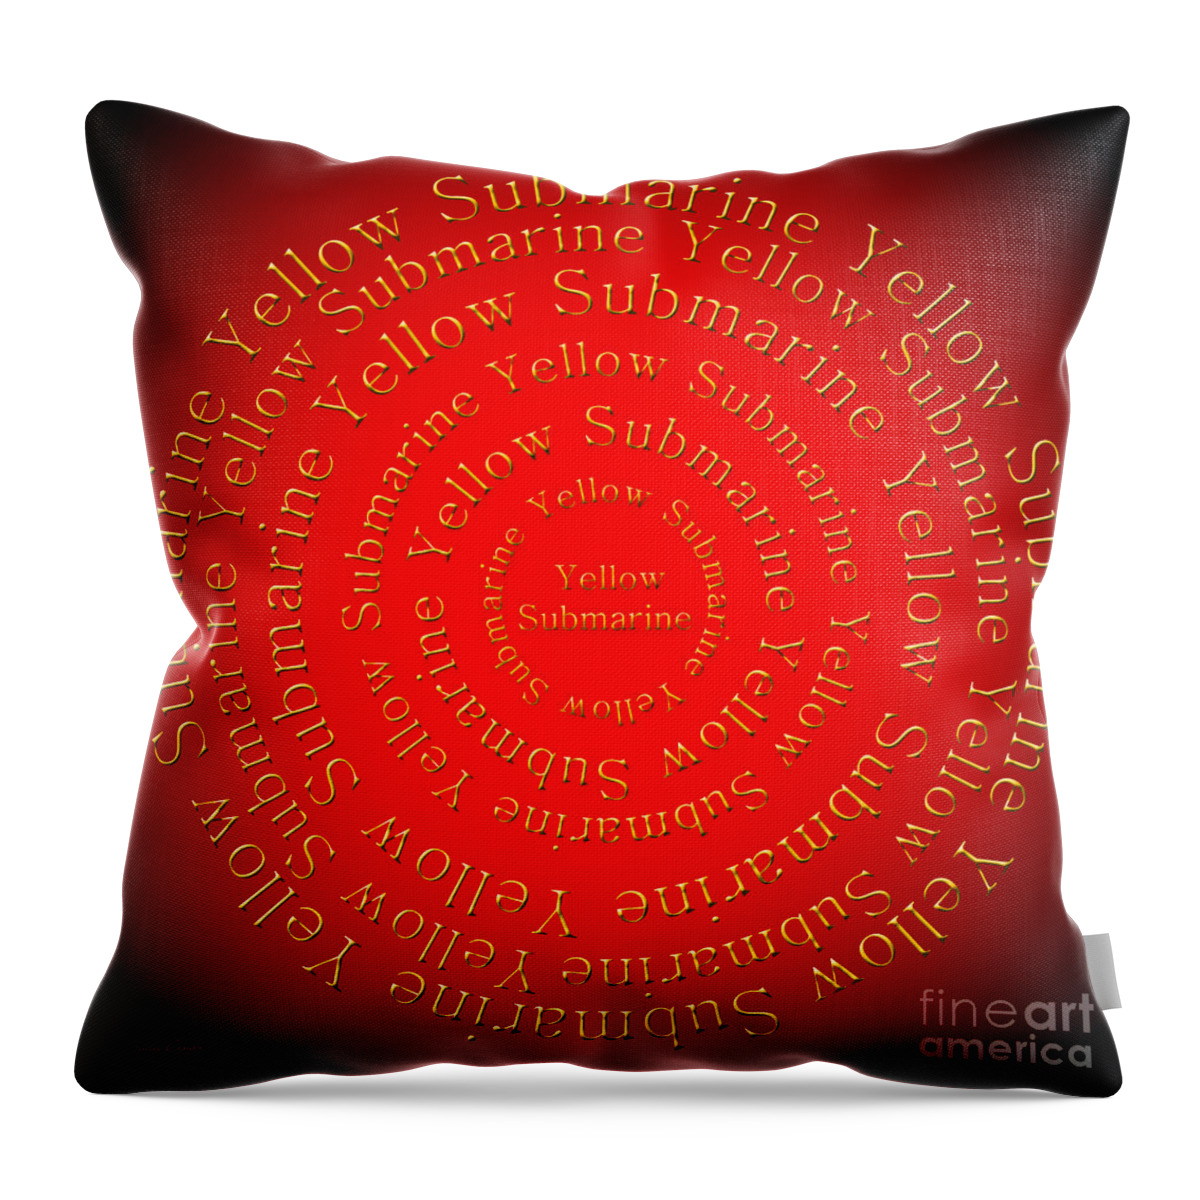 Yellow Submarine Throw Pillow featuring the digital art Yellow Submarine 1 by Andee Design